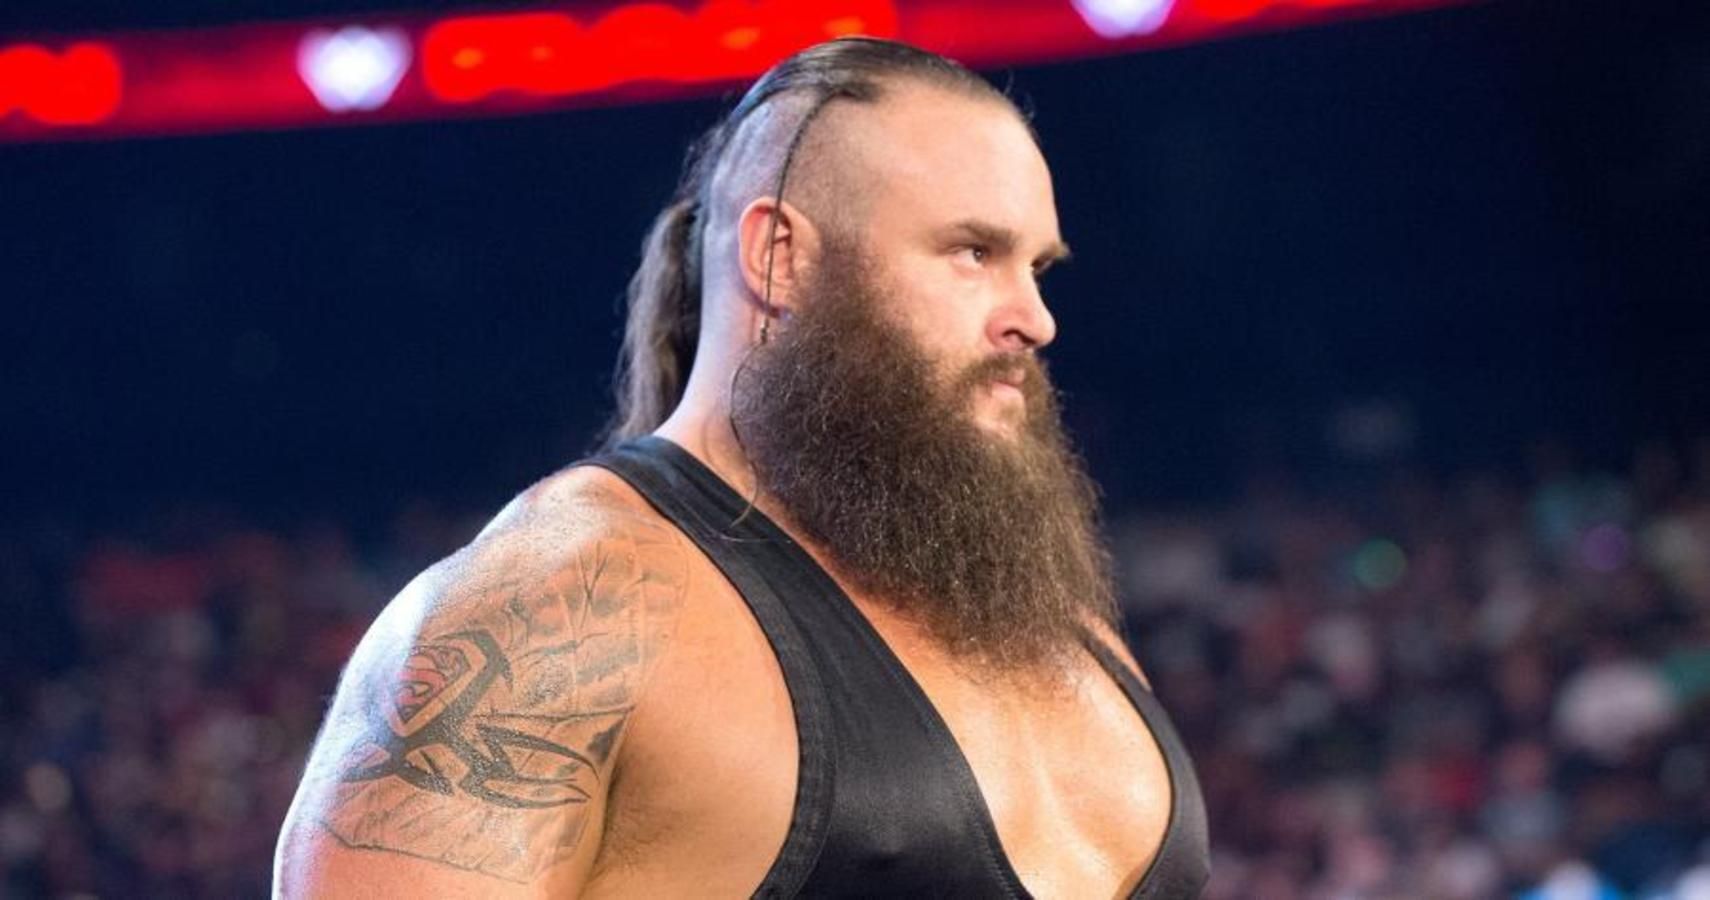 Braun Strowman Will Have A Major Role At Money in the Bank [Rumor]